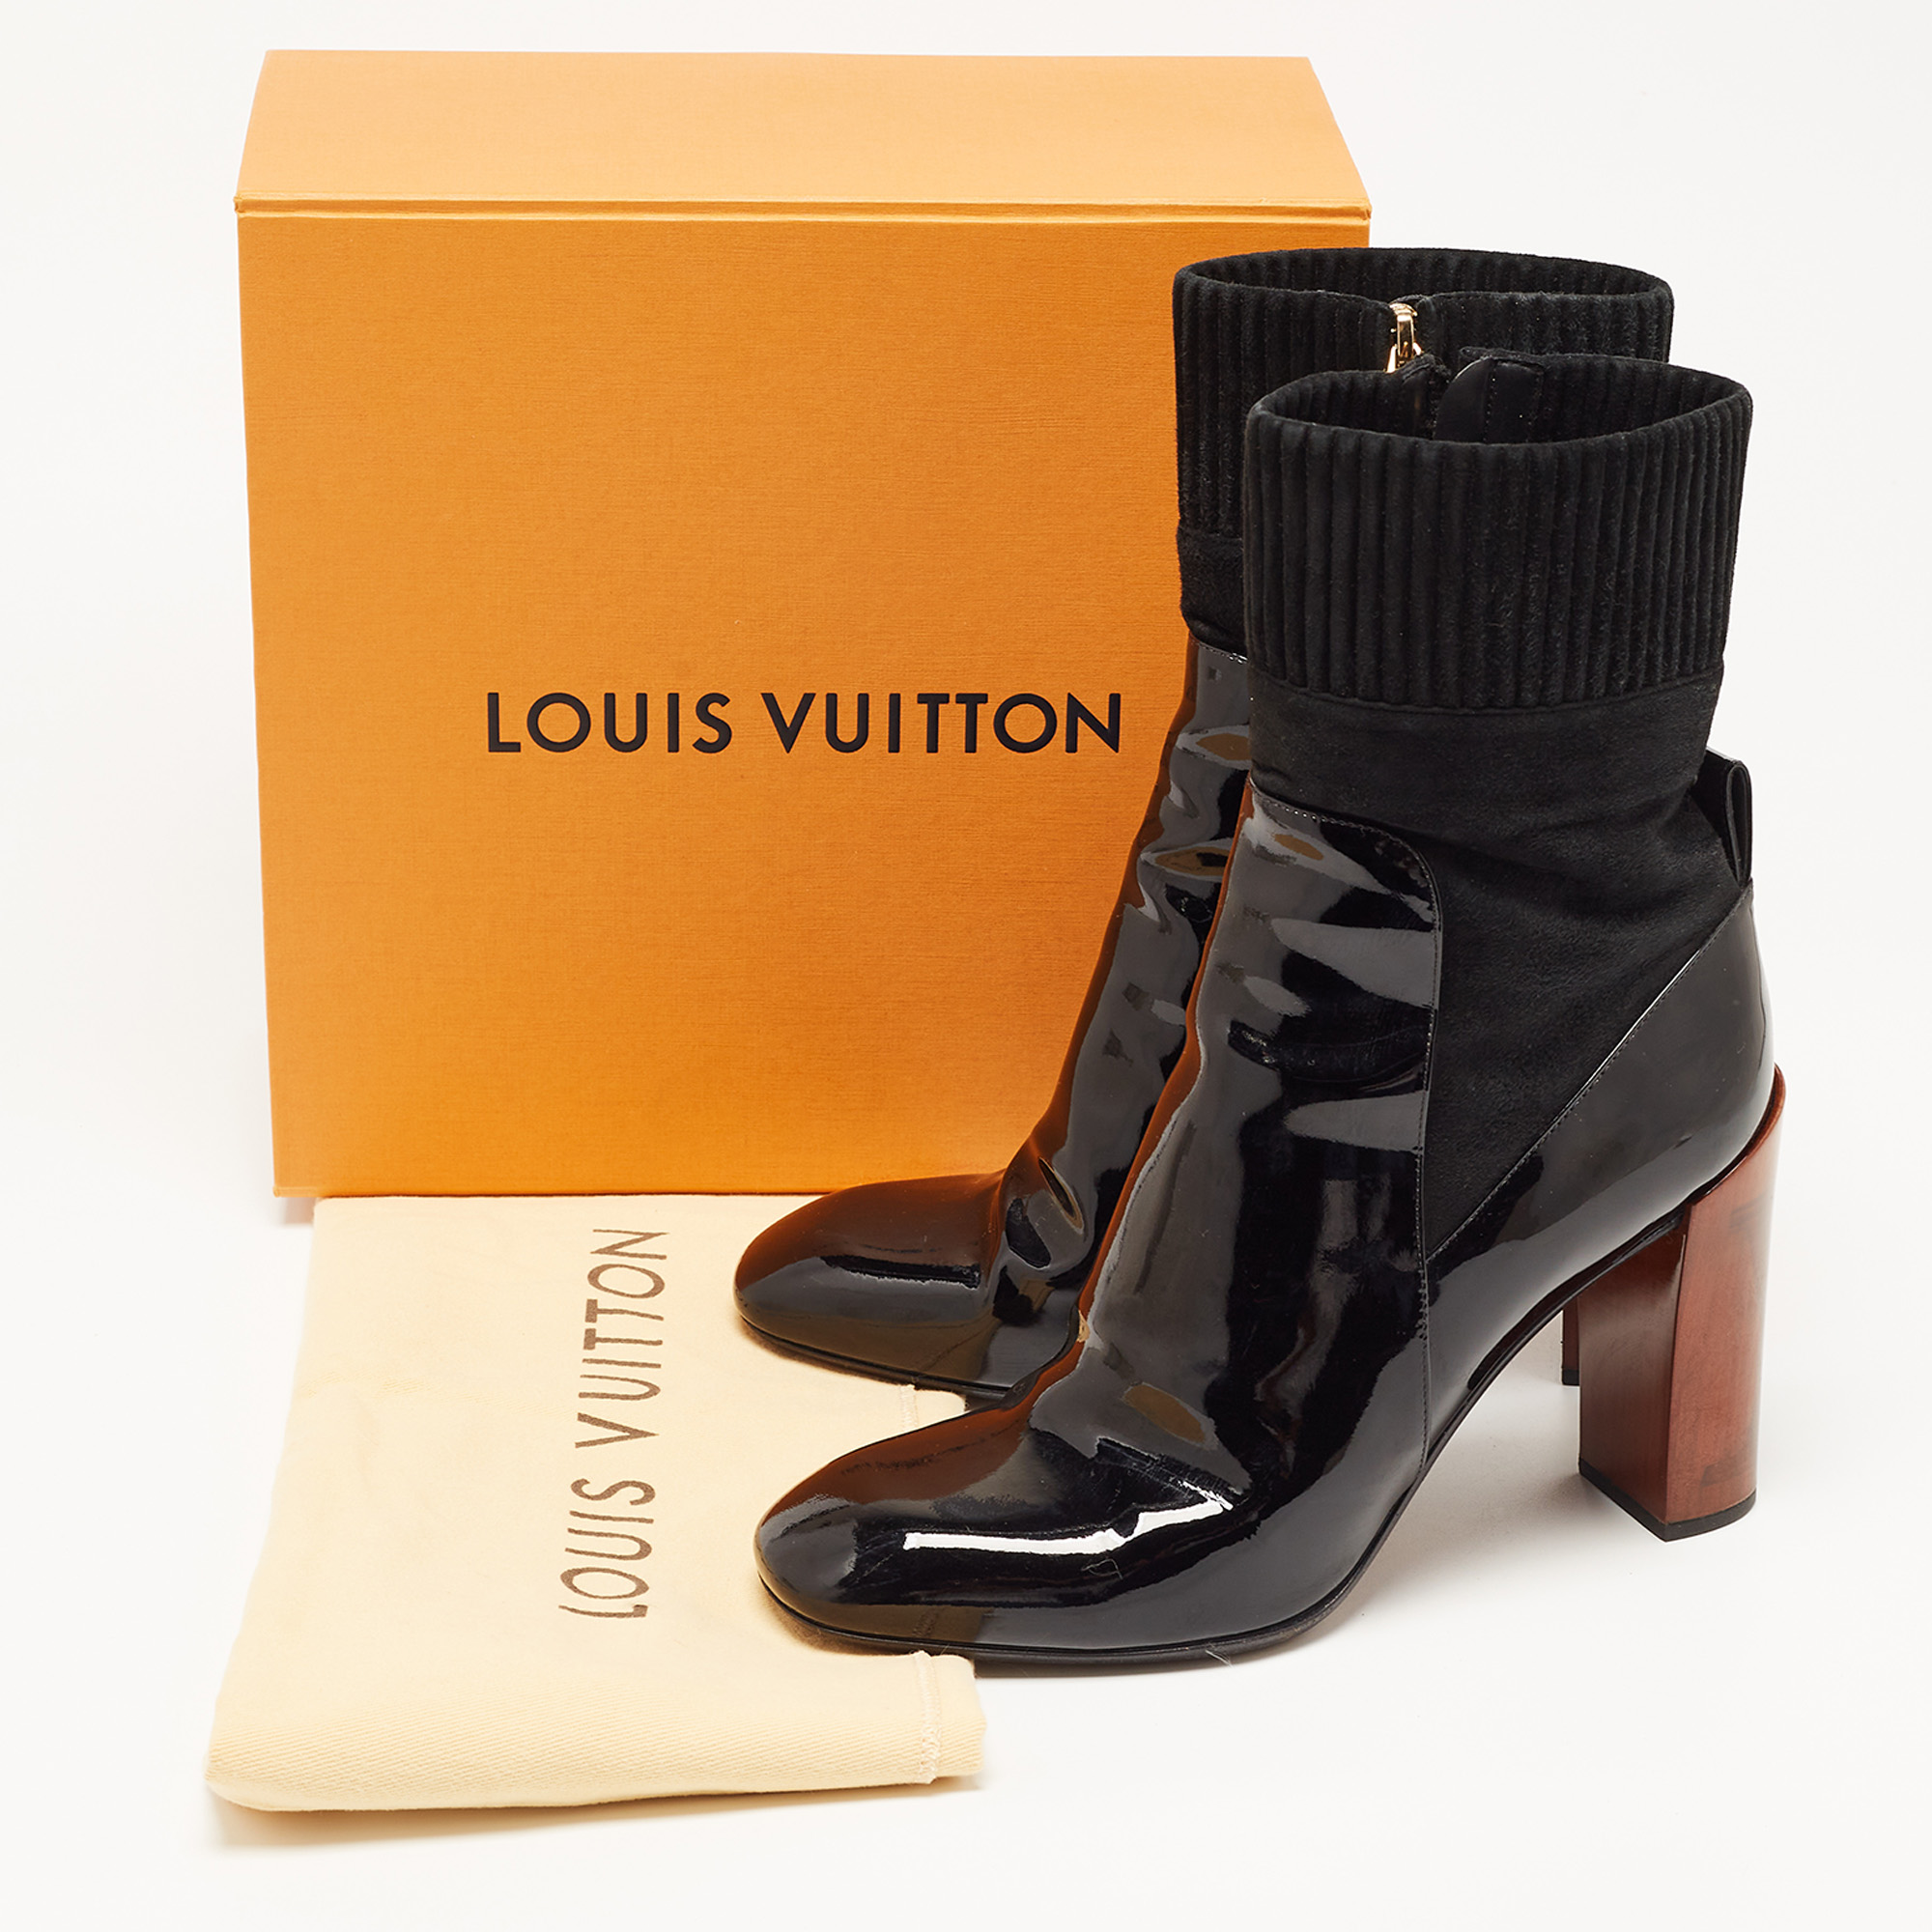 Louis Vuitton Black Patent Leather And Suede Silhouette Ankle Boots Size 38.5